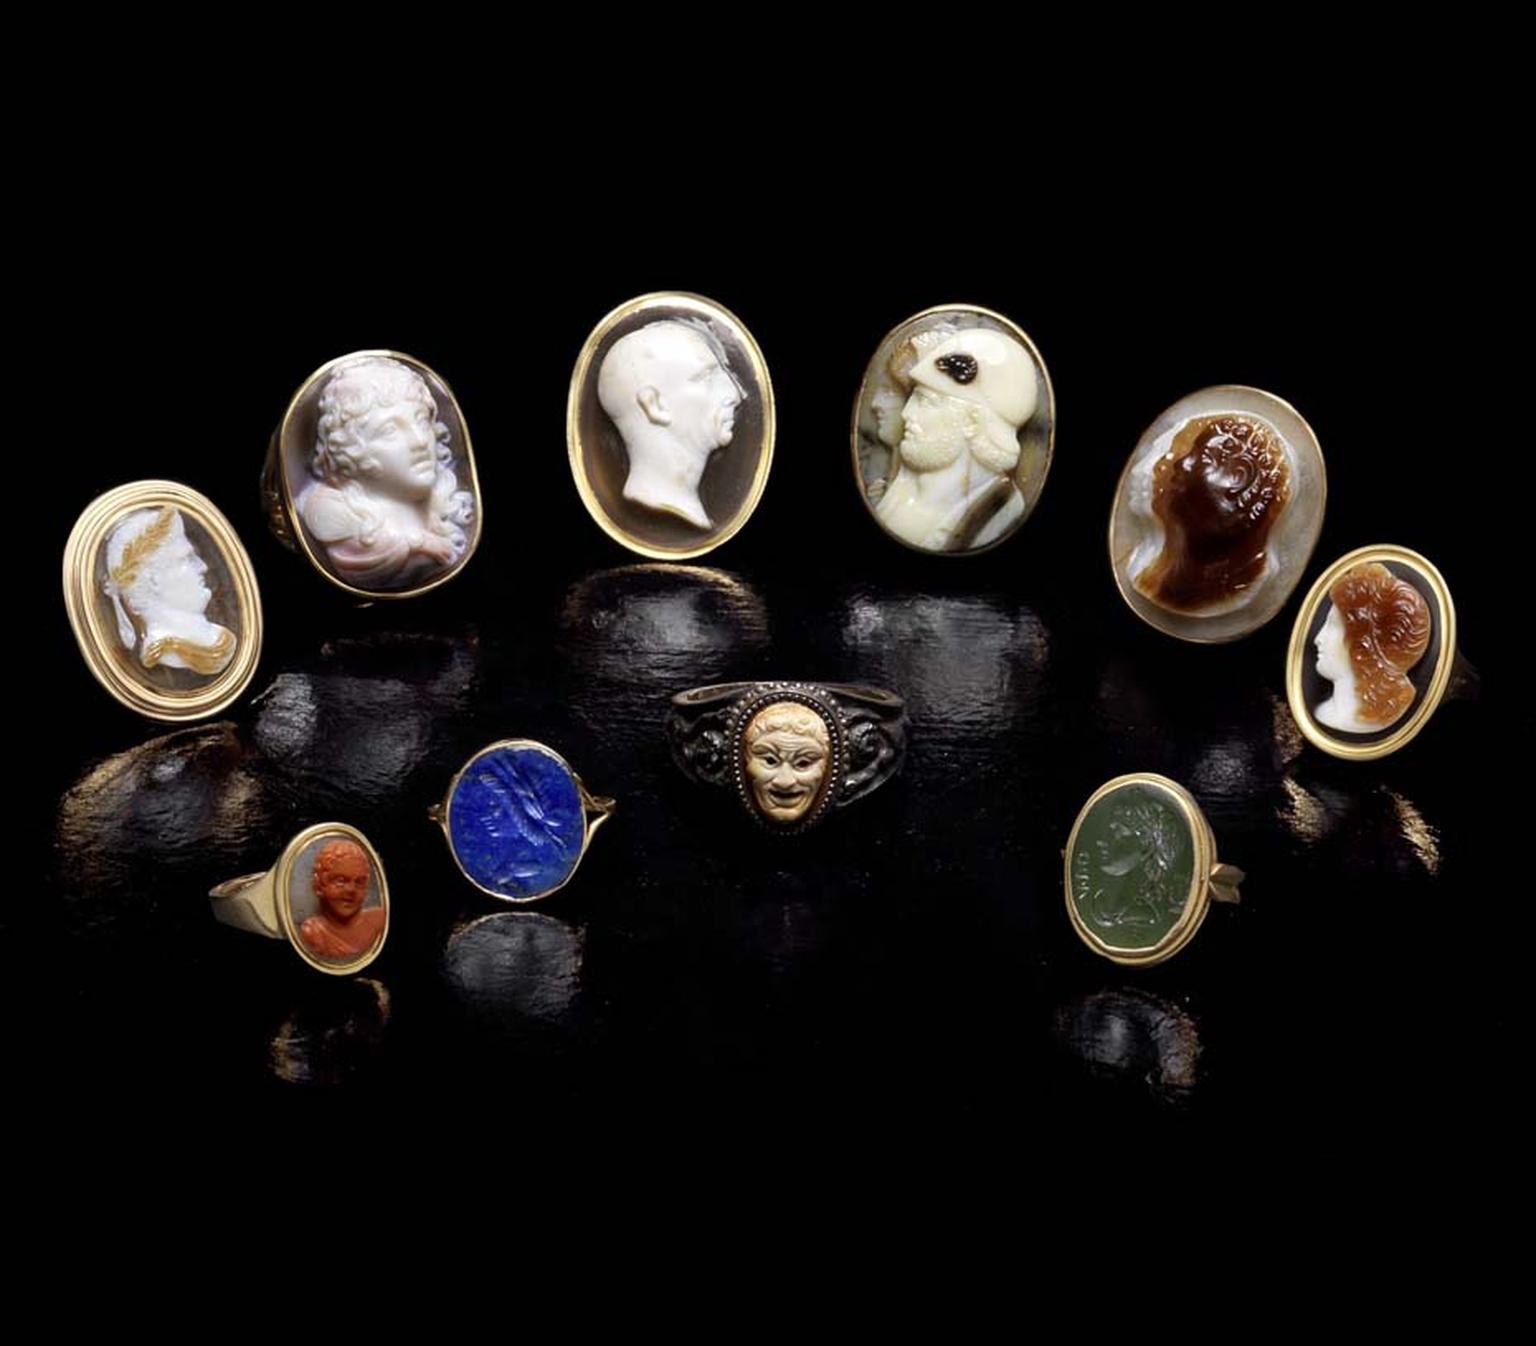 With over 2,500 years of history at your fingertips, the entire Ceres Collection is estimated to sell for £100,000.